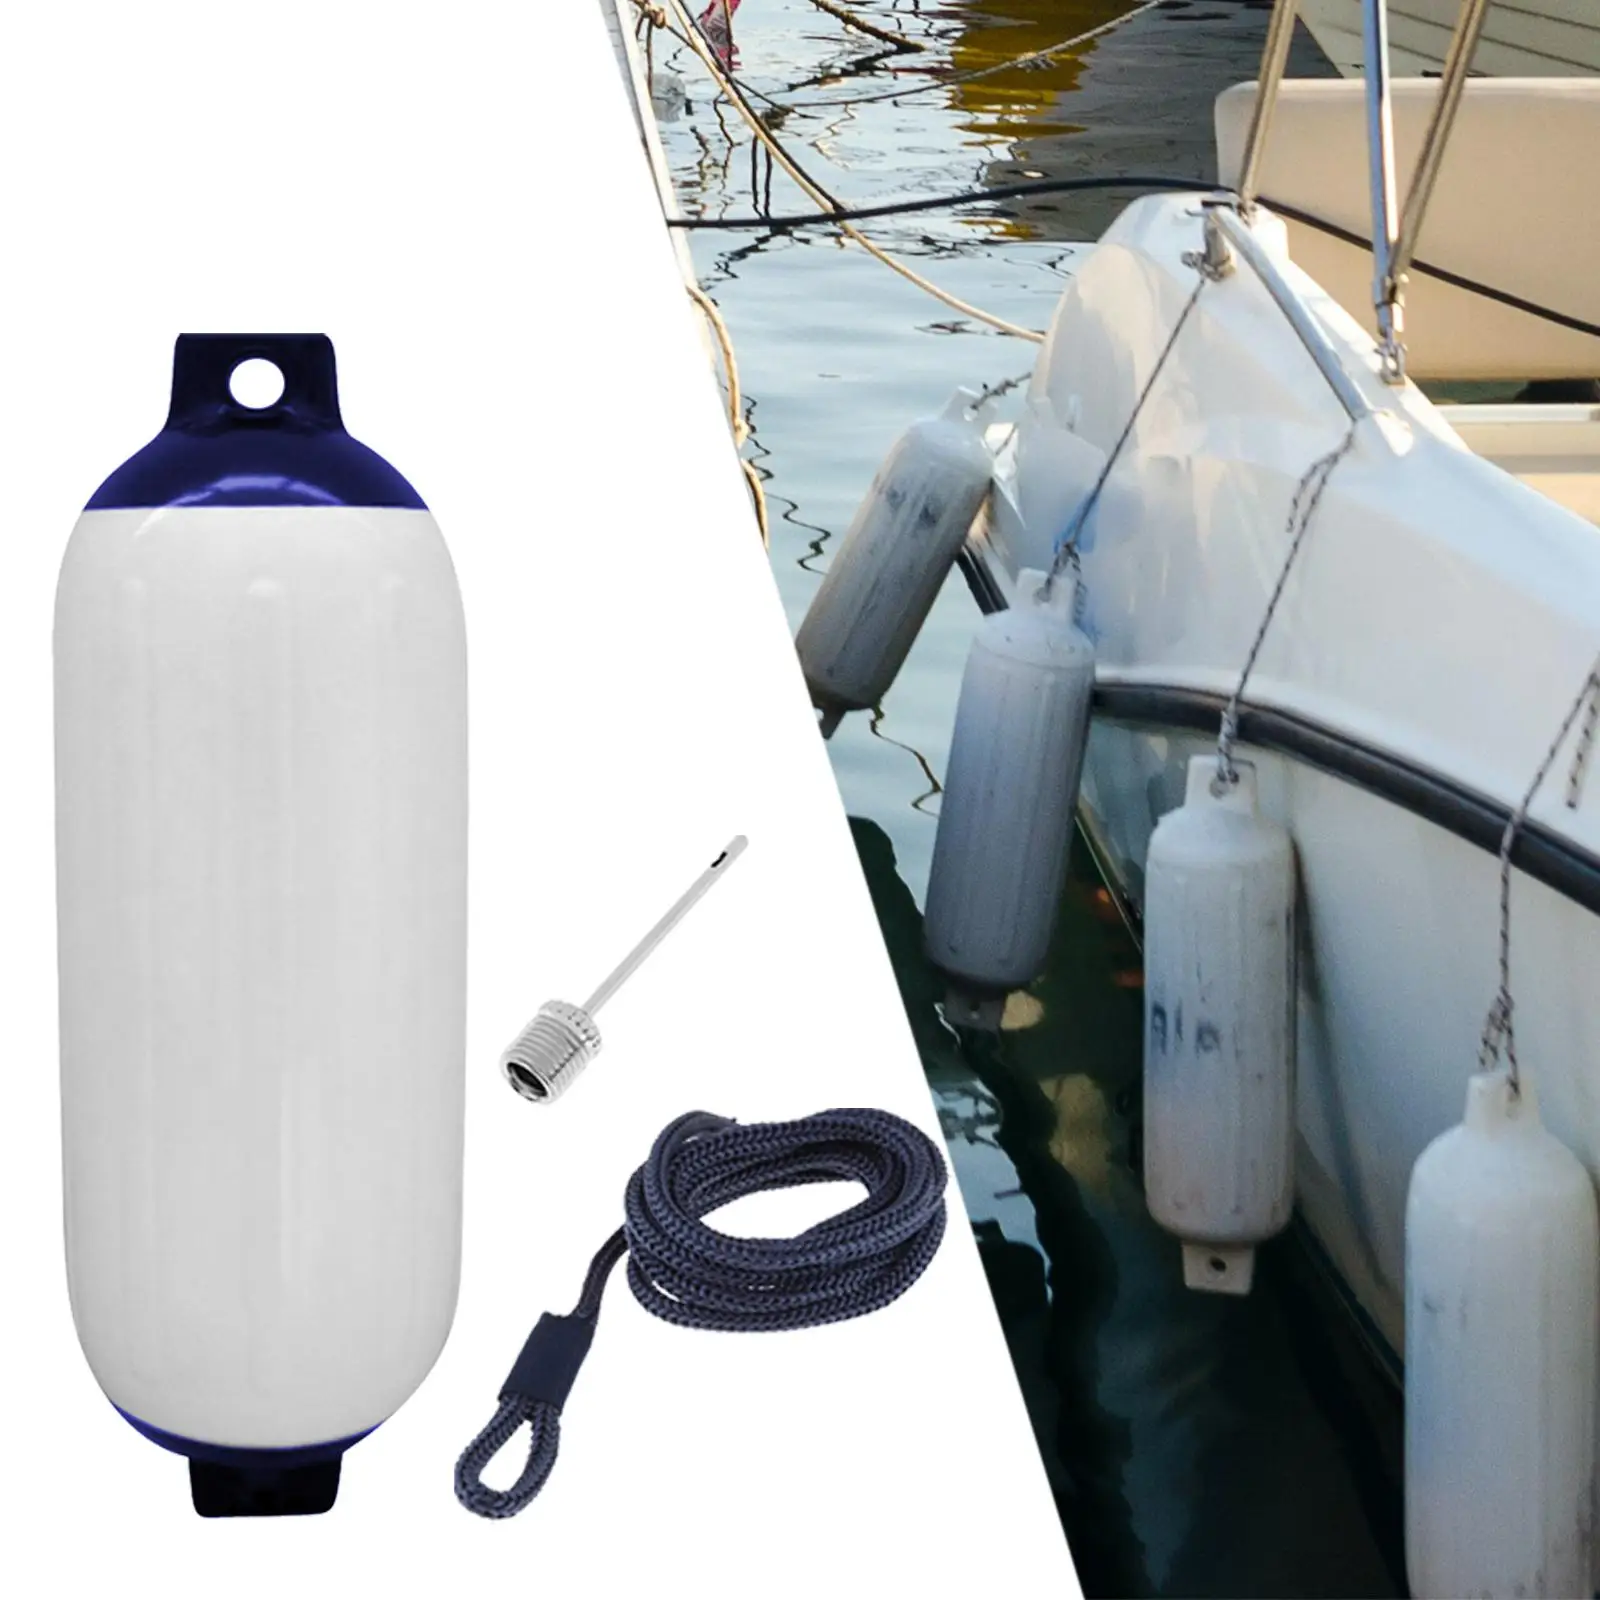 Boat Fender Kit 4x16inch Protector for Docking Fishing Boats Sailboats